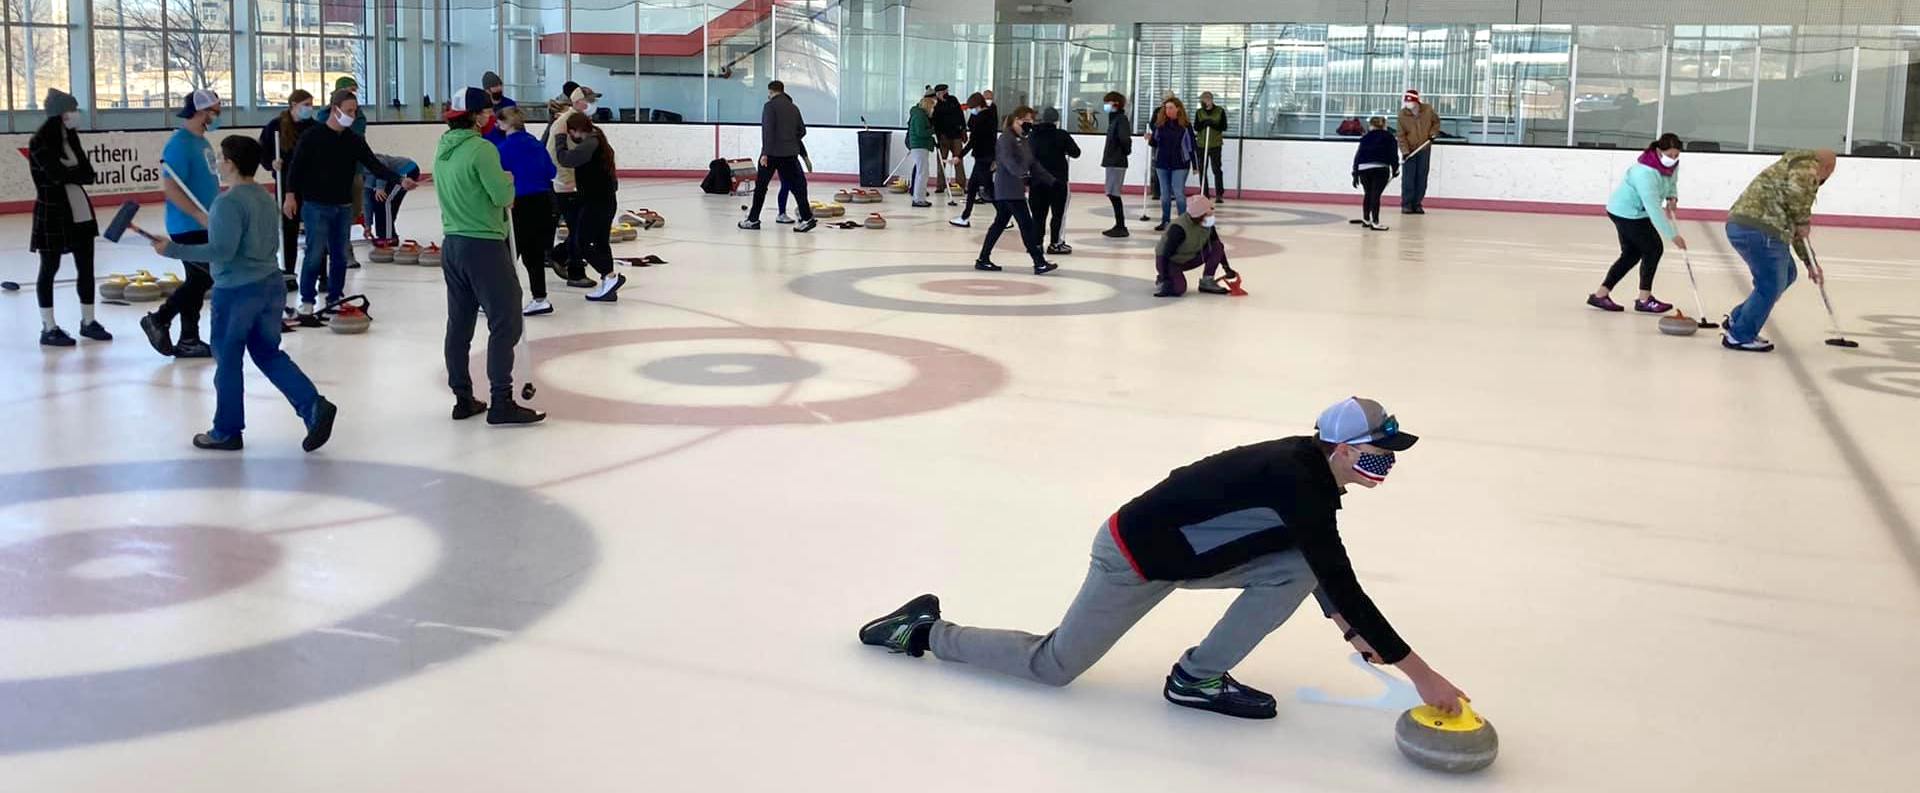 Learn to Curl - Sunday, Mar 12, 2023